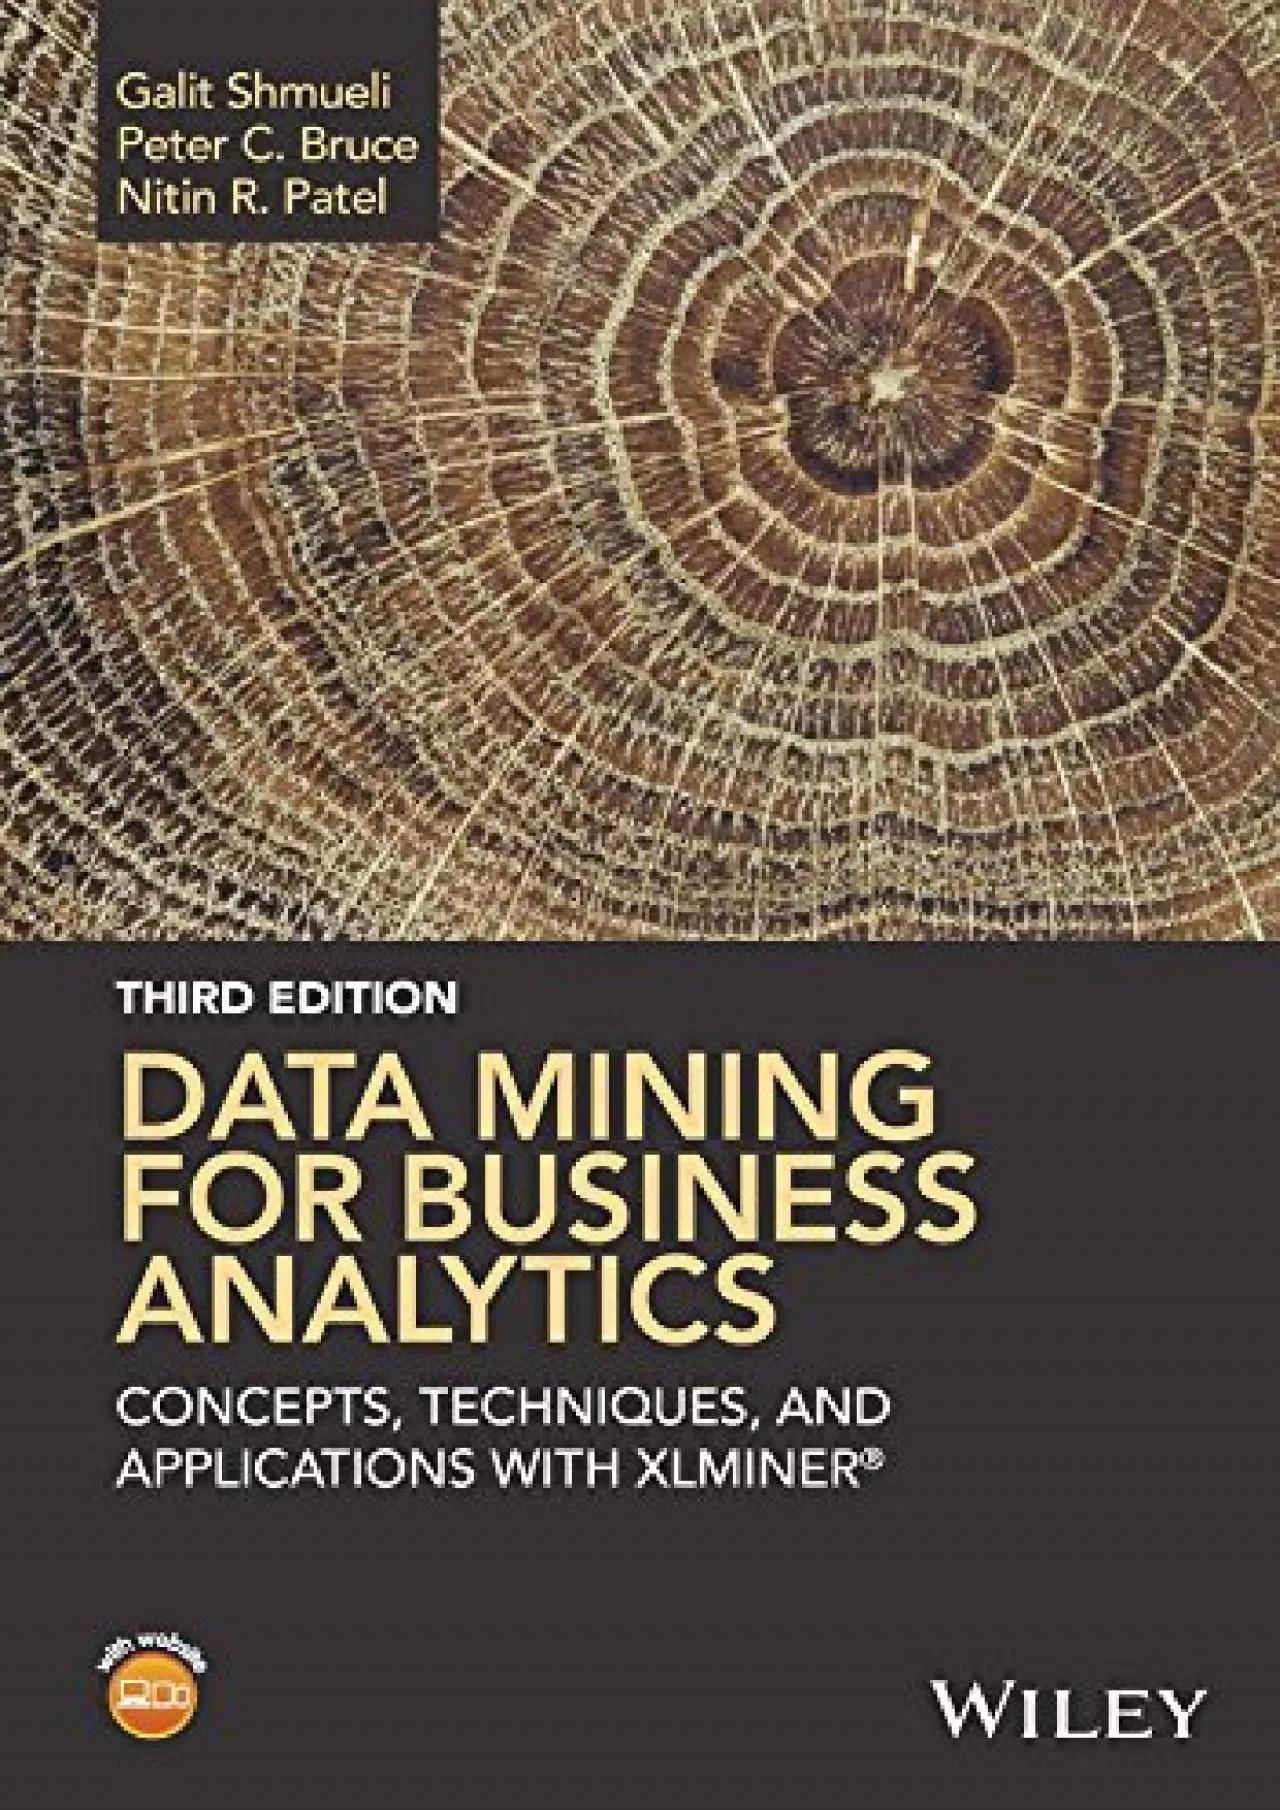 (DOWNLOAD)-Data Mining for Business Analytics: Concepts, Techniques, and Applications